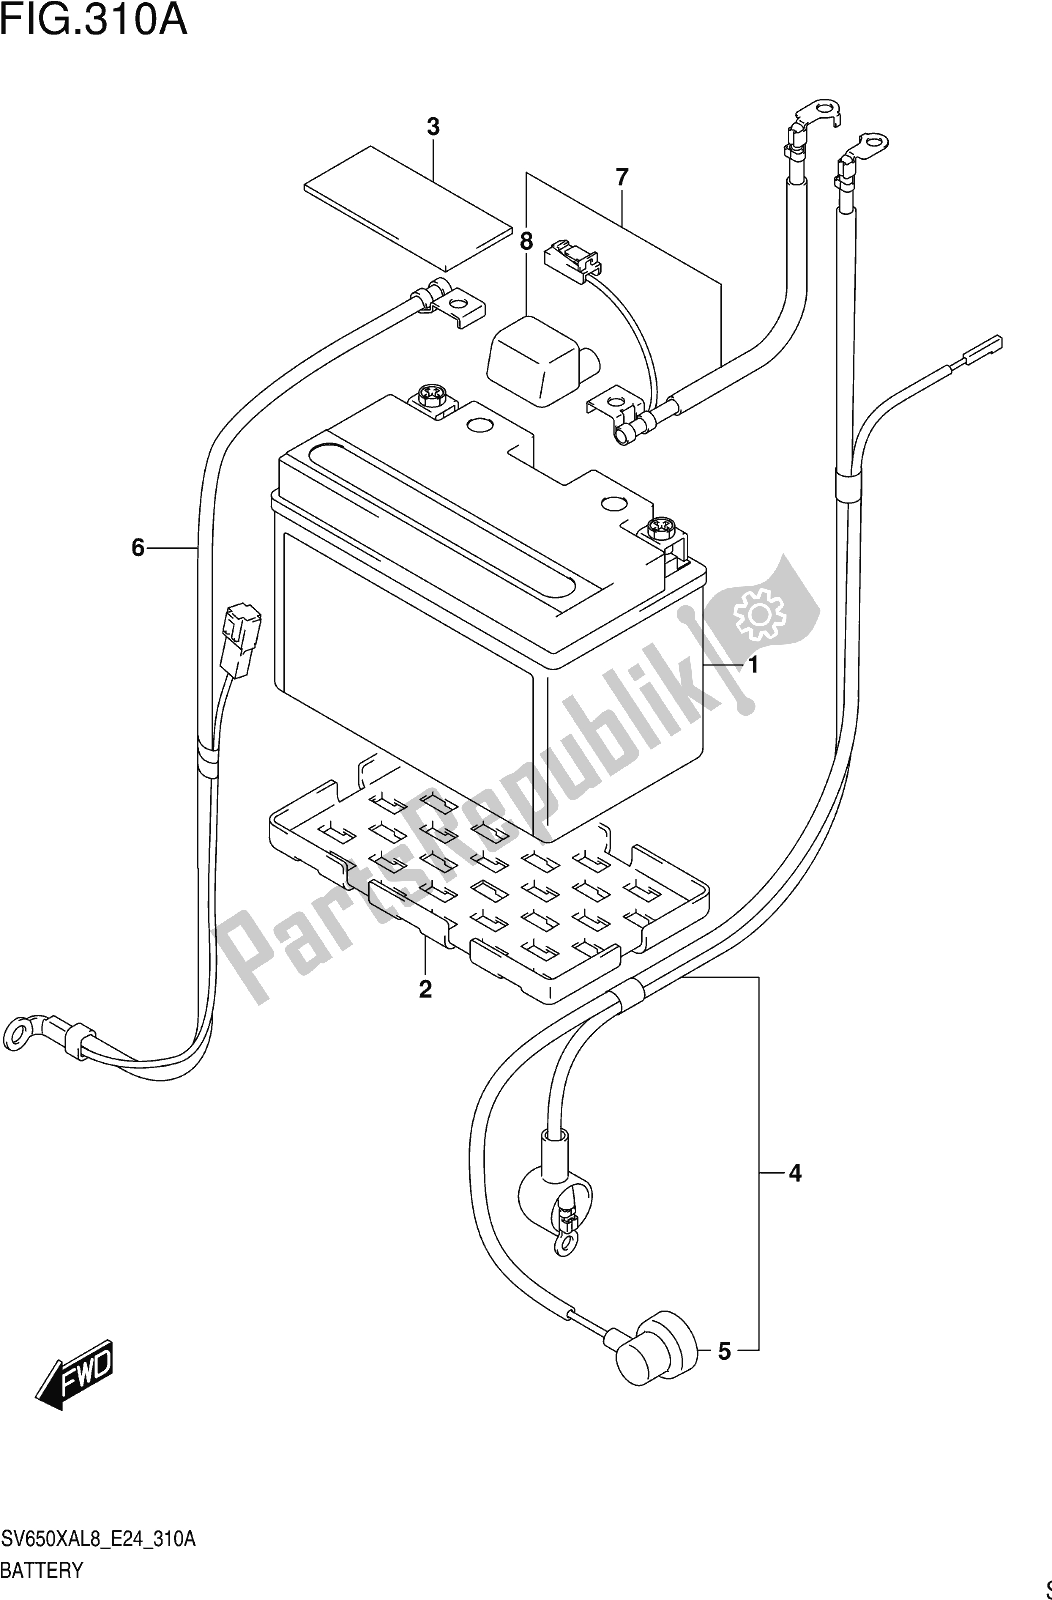 All parts for the Fig. 310a Battery of the Suzuki SV 650 XAU 2018